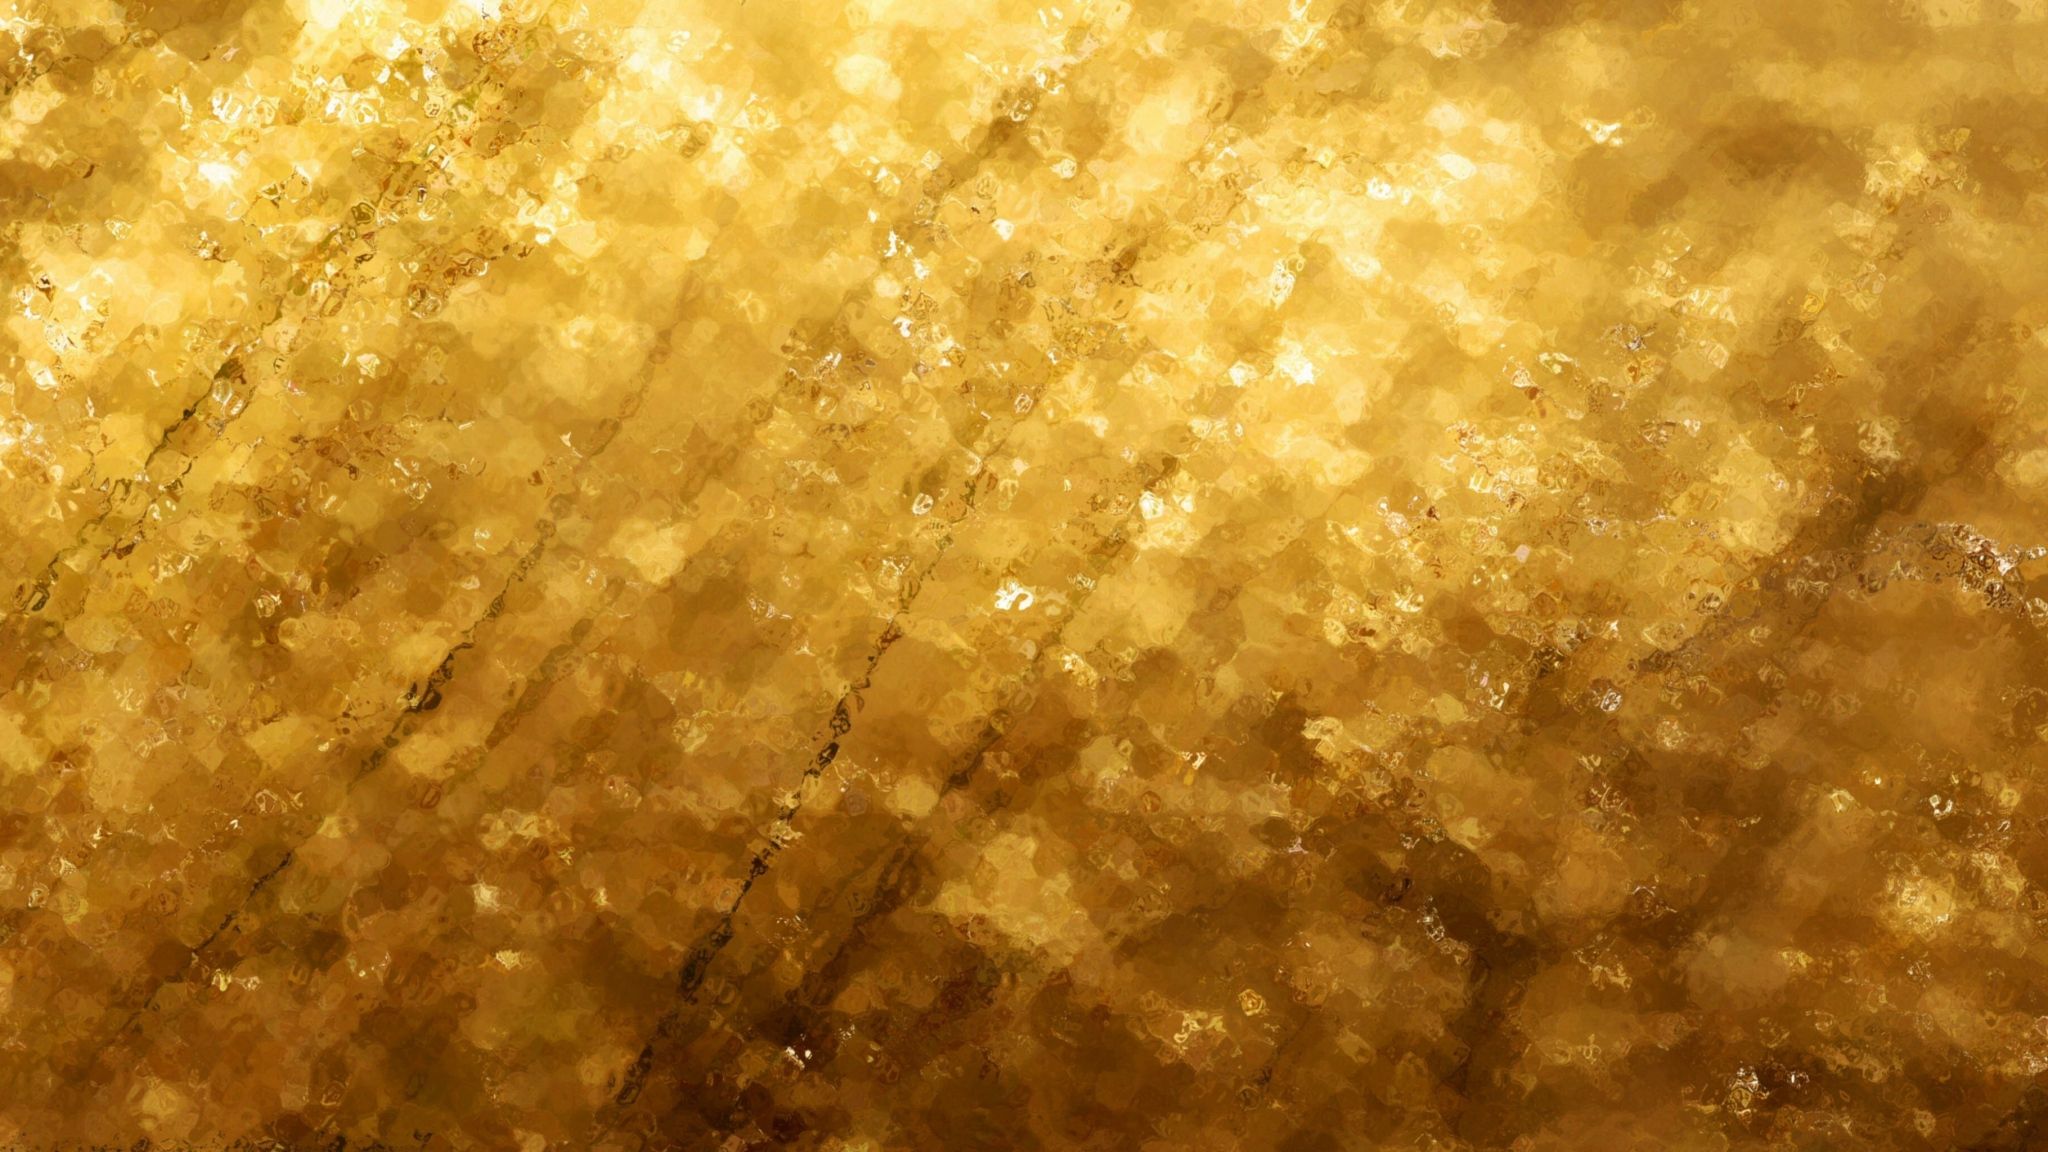 HD wallpaper, And, Wallpaper, White, Awesome, Gold